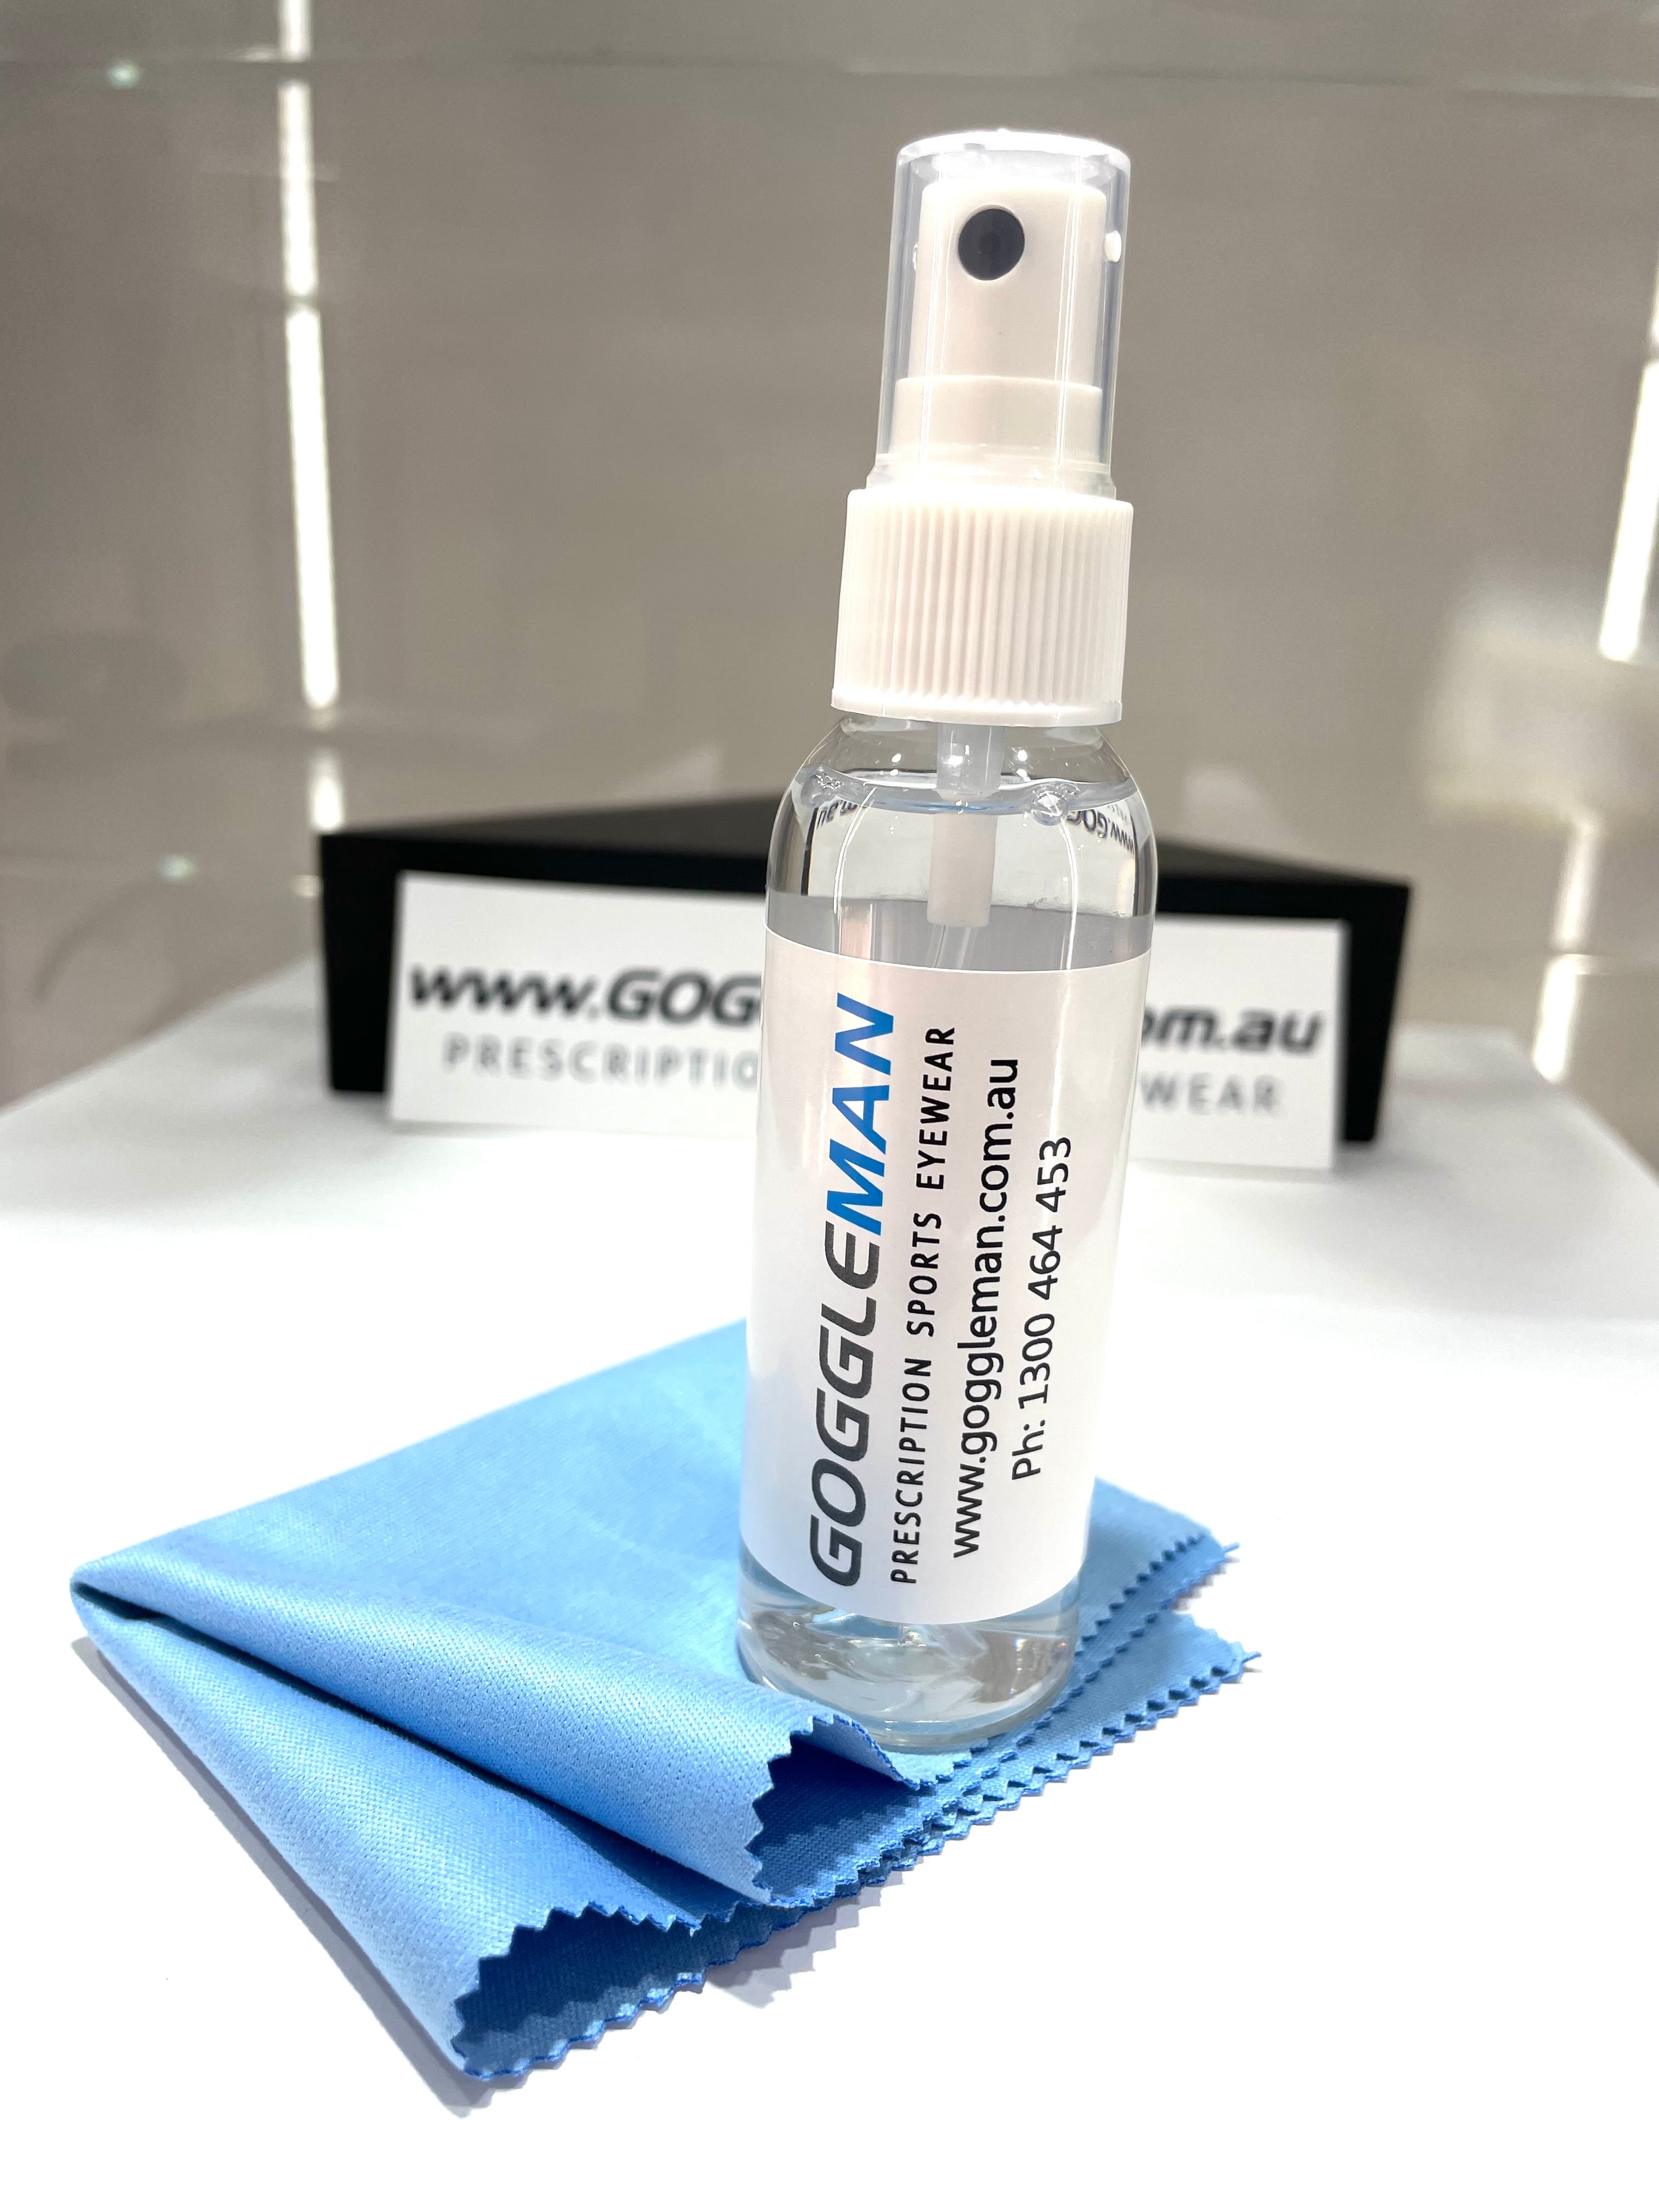 Goggleman Lens Cleaner and Cloth